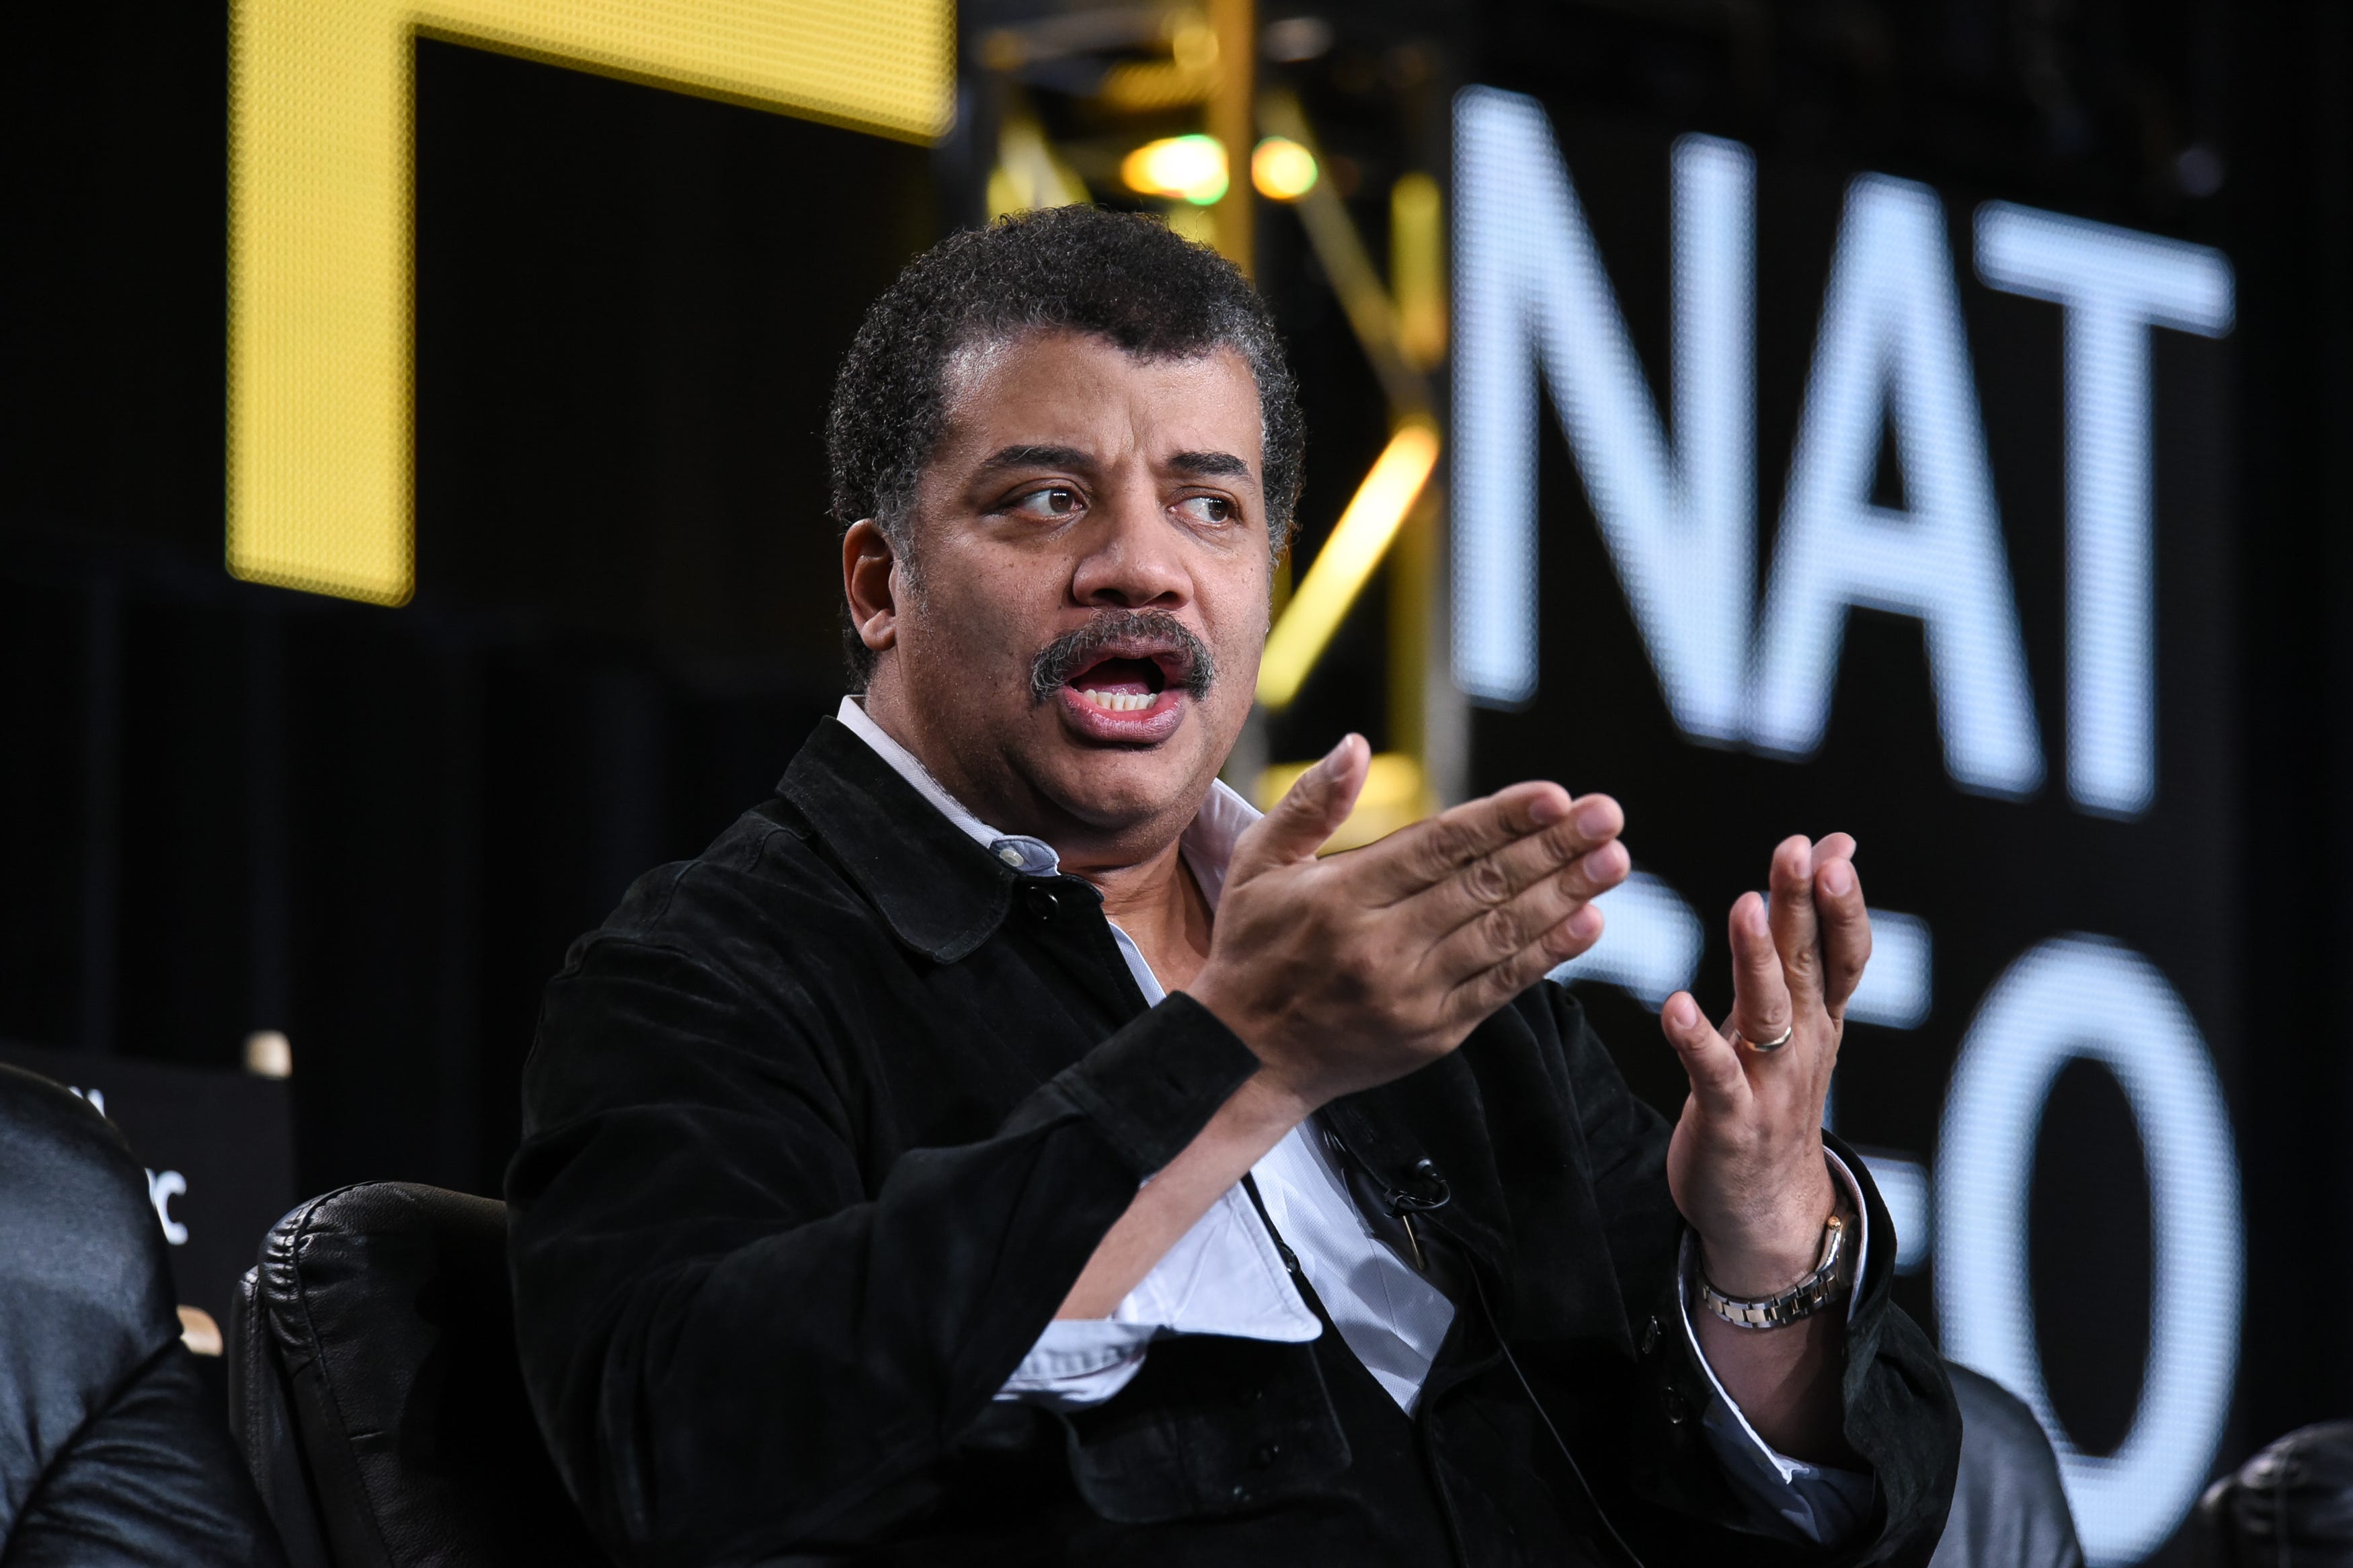 You know what&apos;s awesome? Life in this universe. Ask Neil deGrasse Tyson